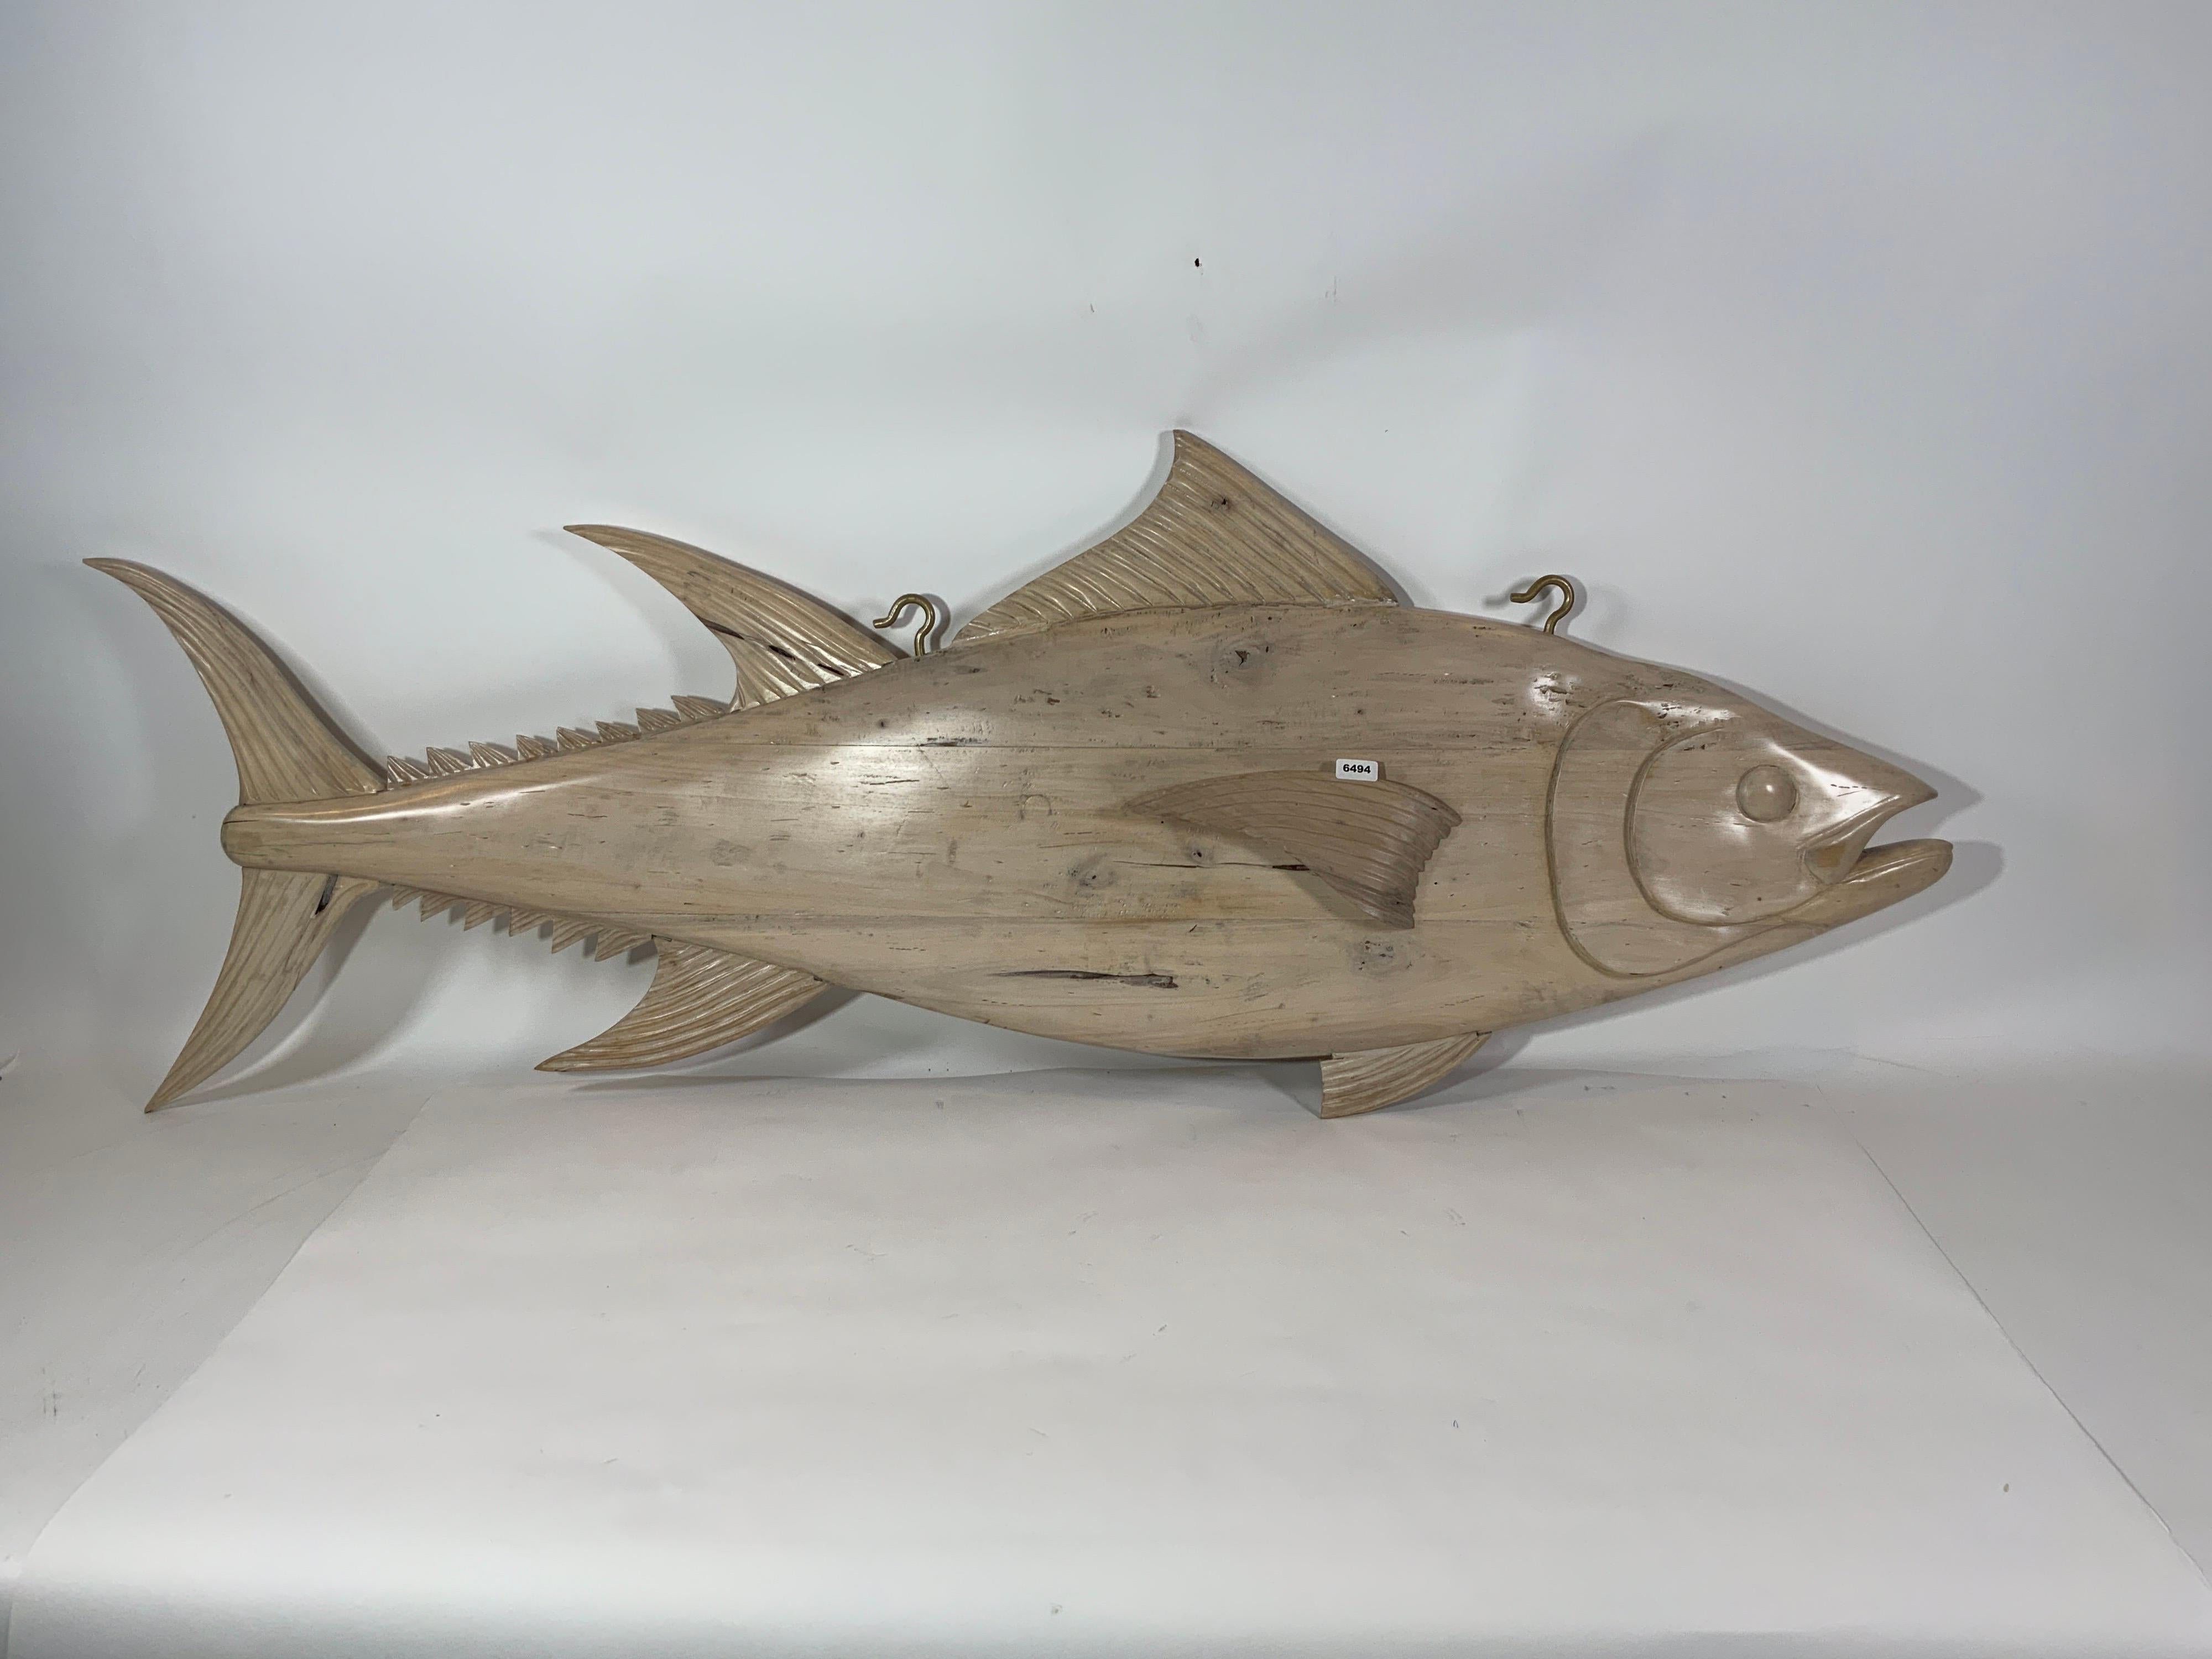 Finely carved tuna fish trade sign with pickled finish. Carved from solid timber with fins, gills, eyes and snout. Fitted with hanging hooks.

Overall Dimensions: Weight is 35 pounds. 26